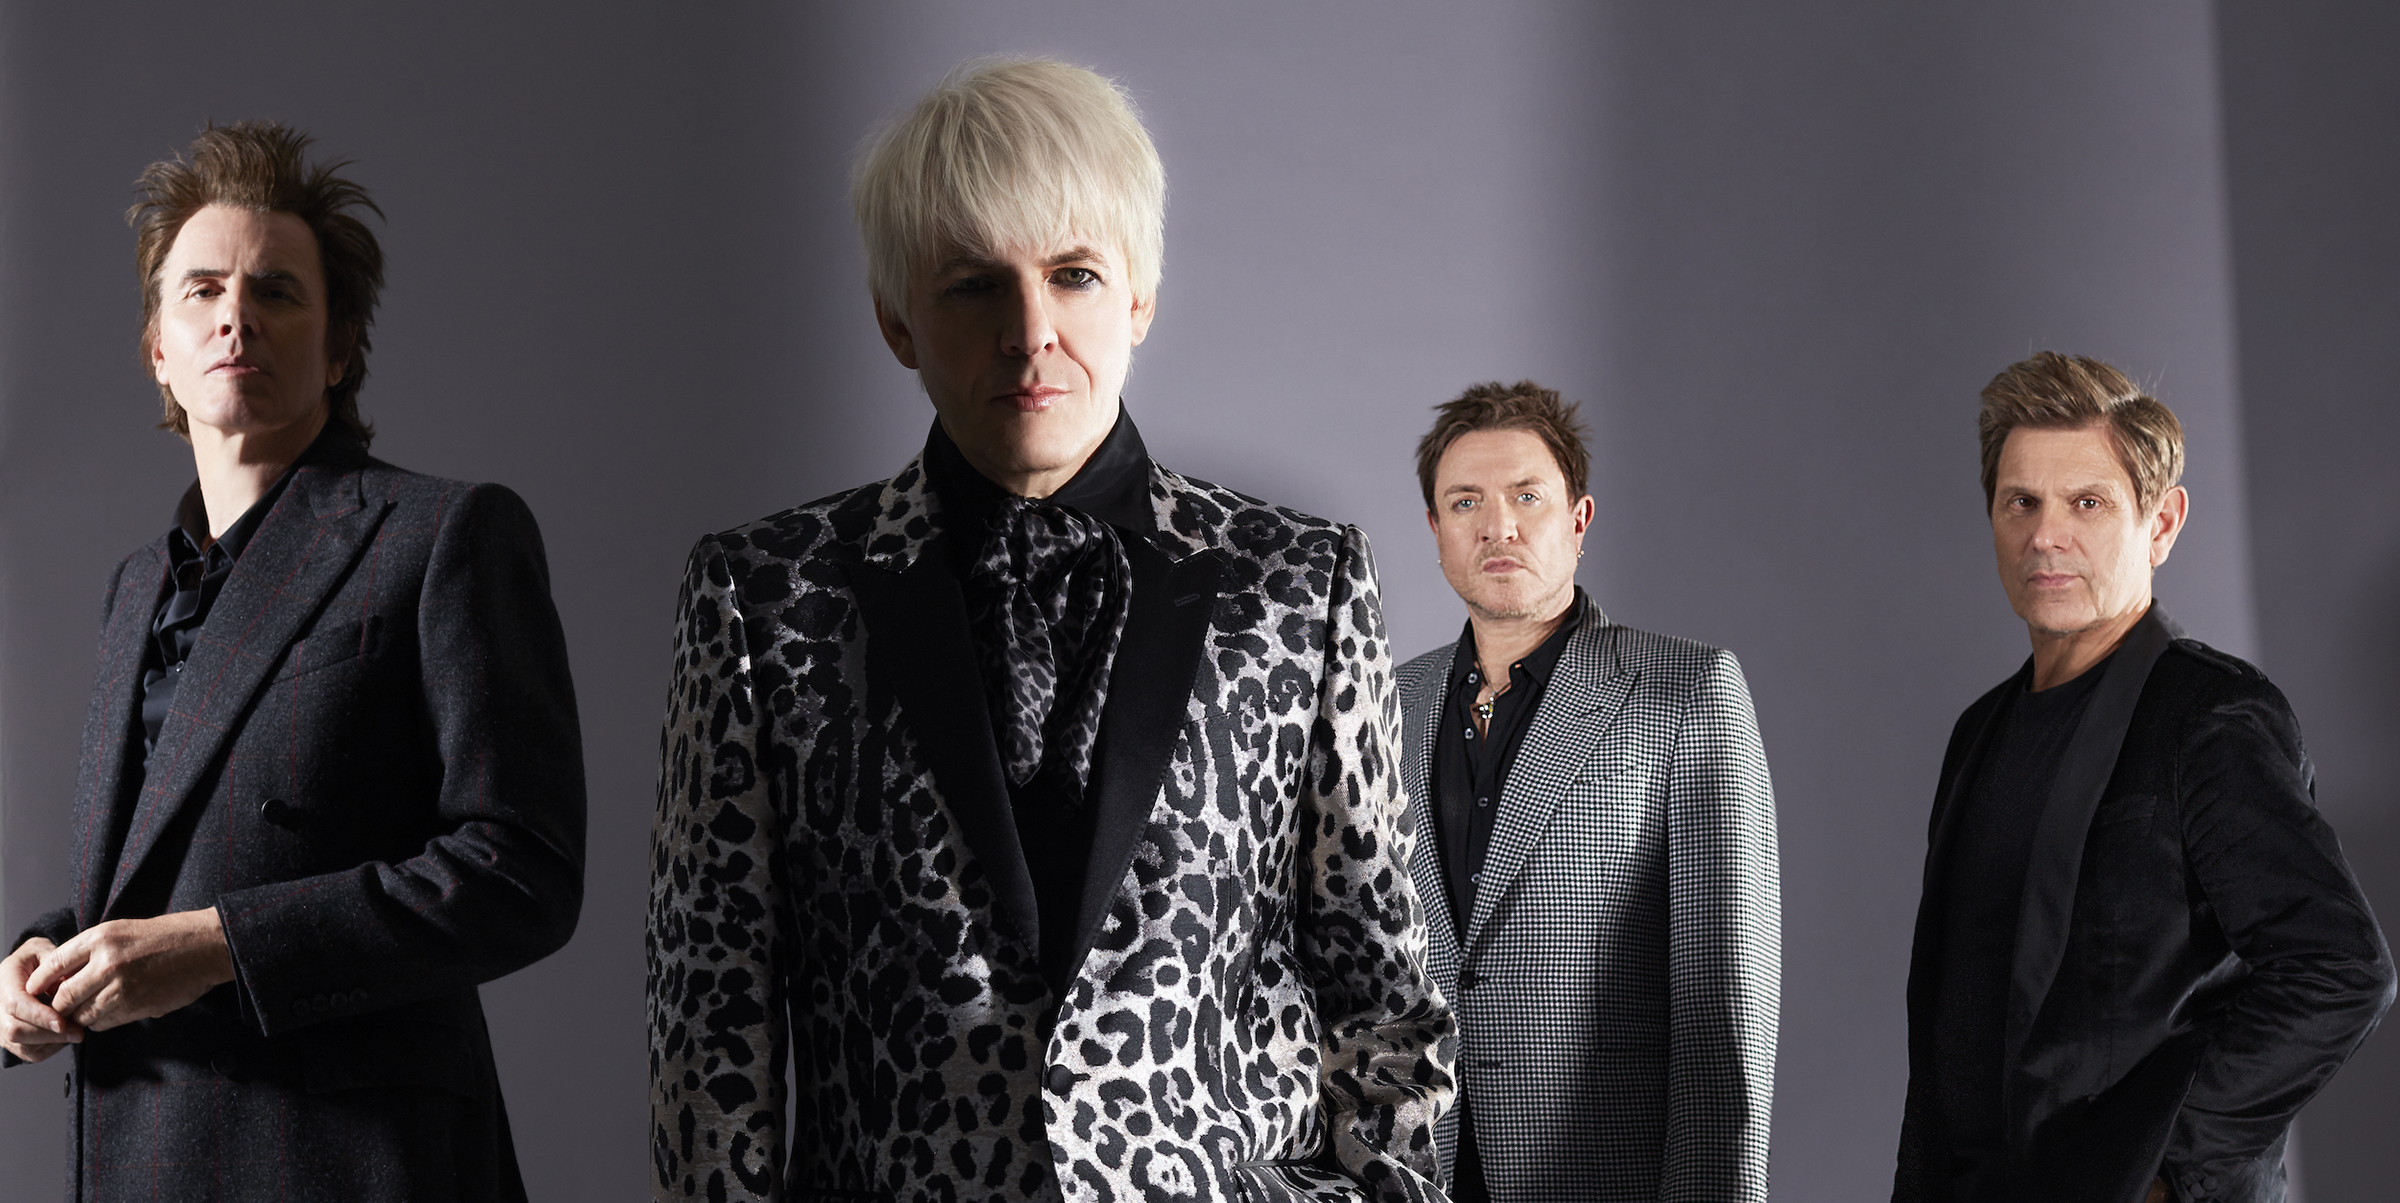 DURAN DURAN announce two intimate shows in their hometown of Birmingham, at the O2 Institute this September 